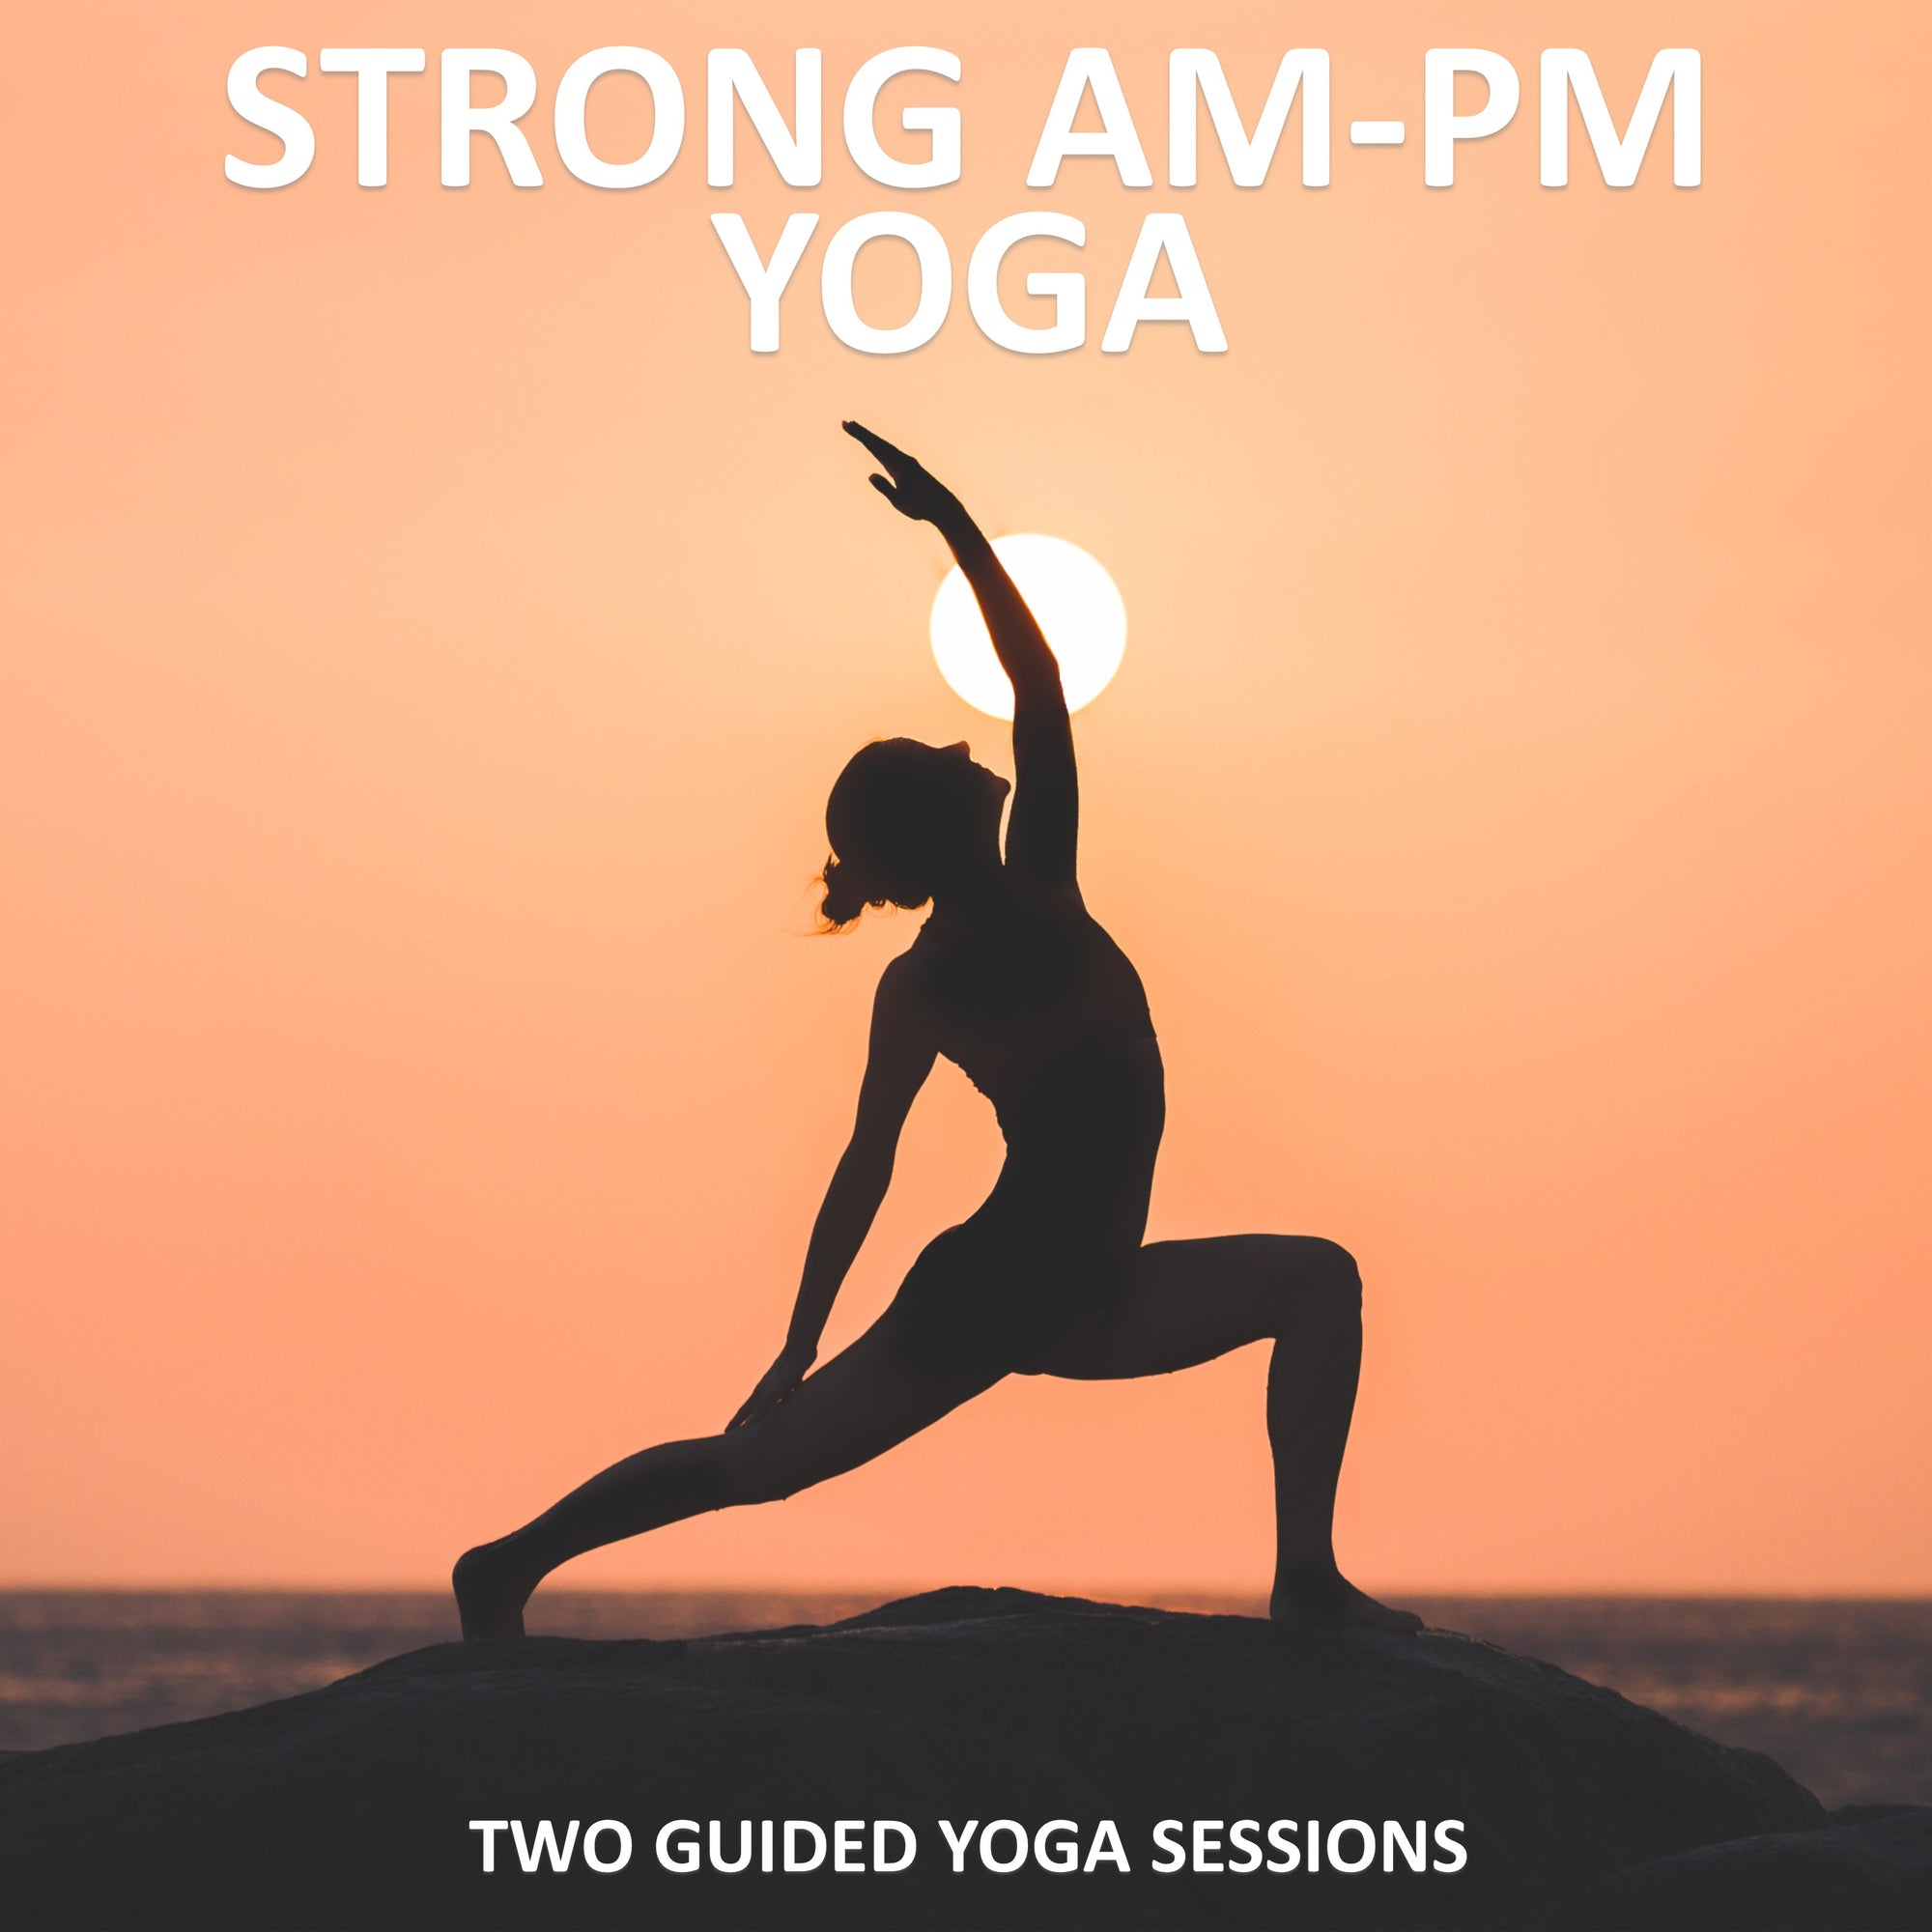 Strong AM-PM Yoga